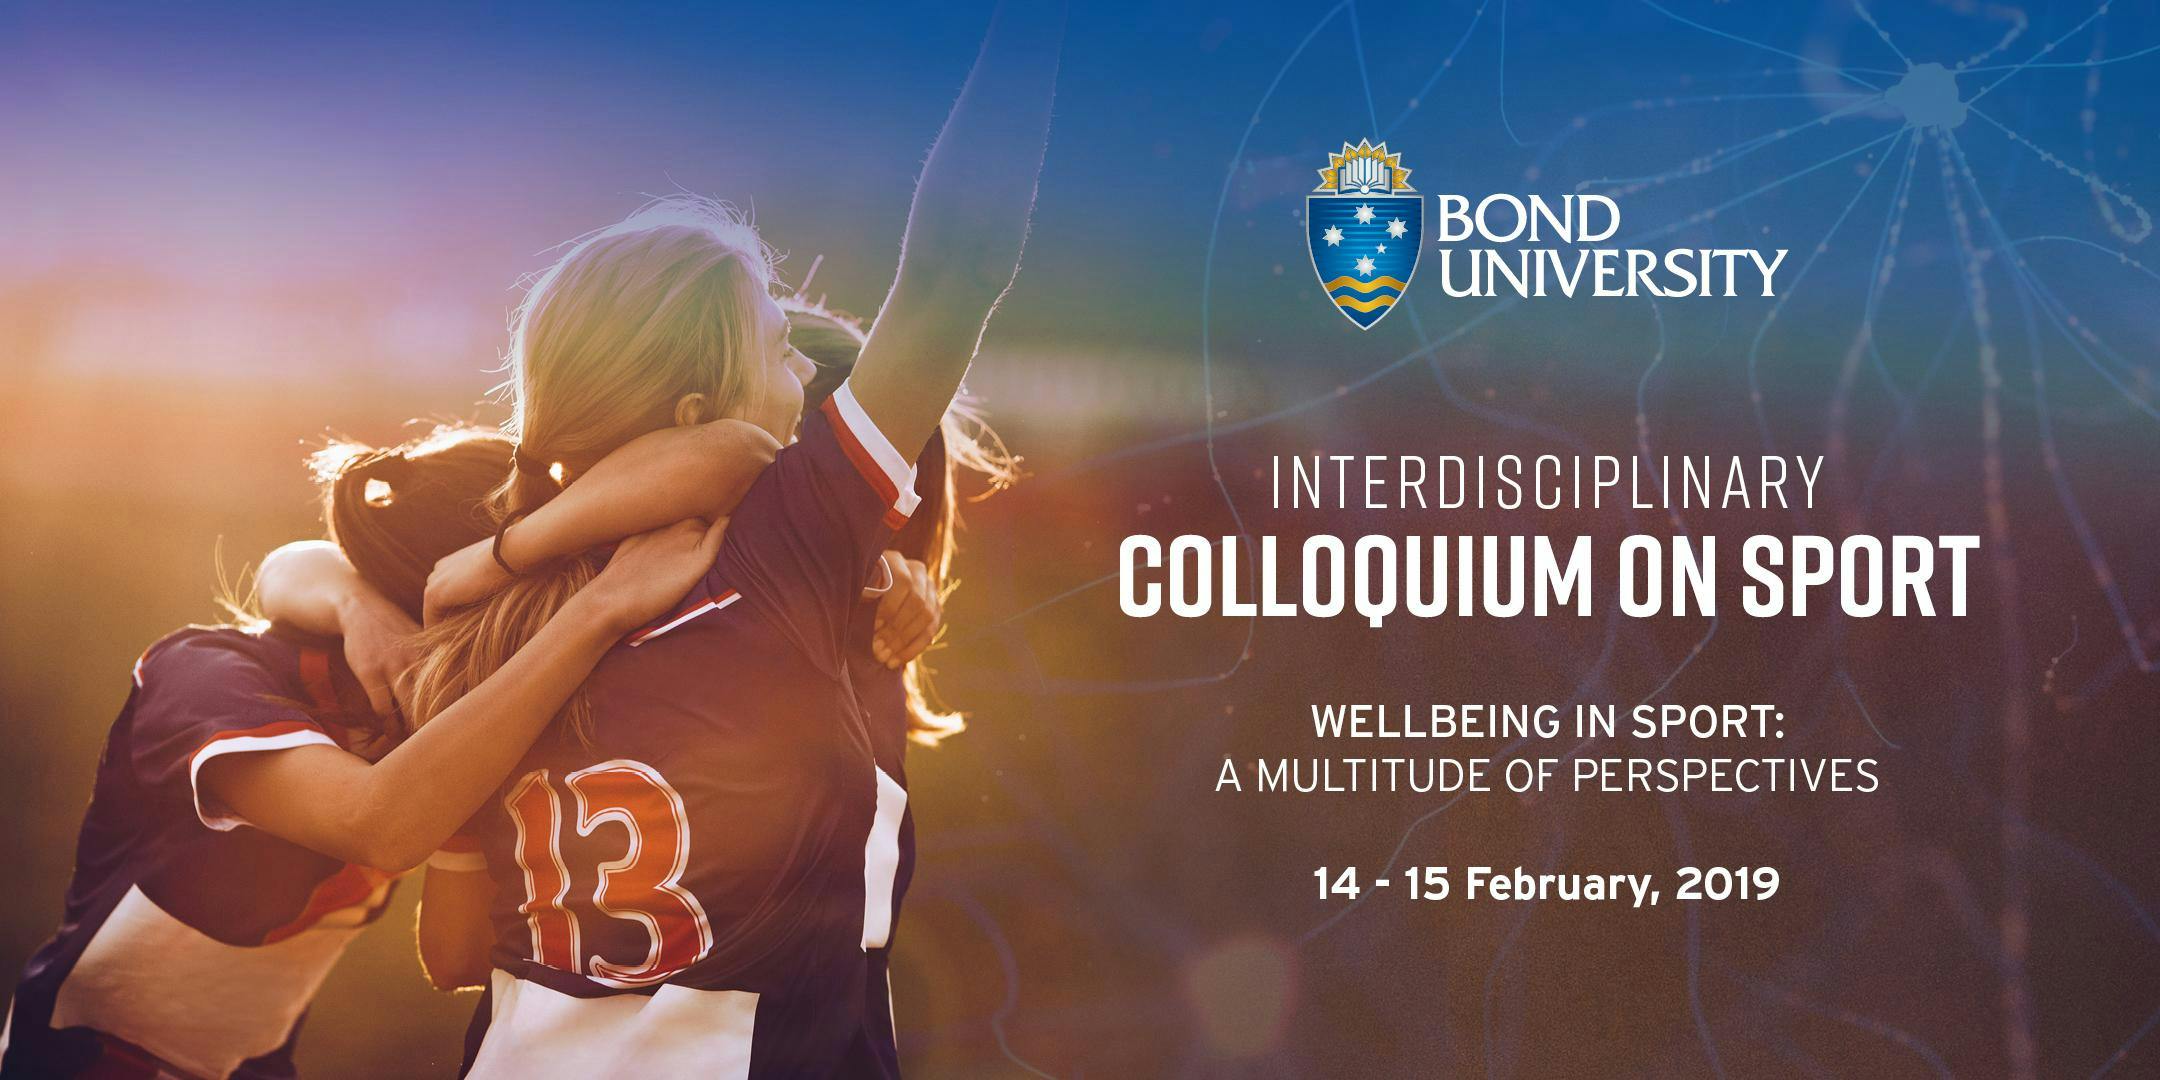 2019 Interdisciplinary Colloquium on Sport | 'Wellbeing in Sport, A Multitude of Perspectives'